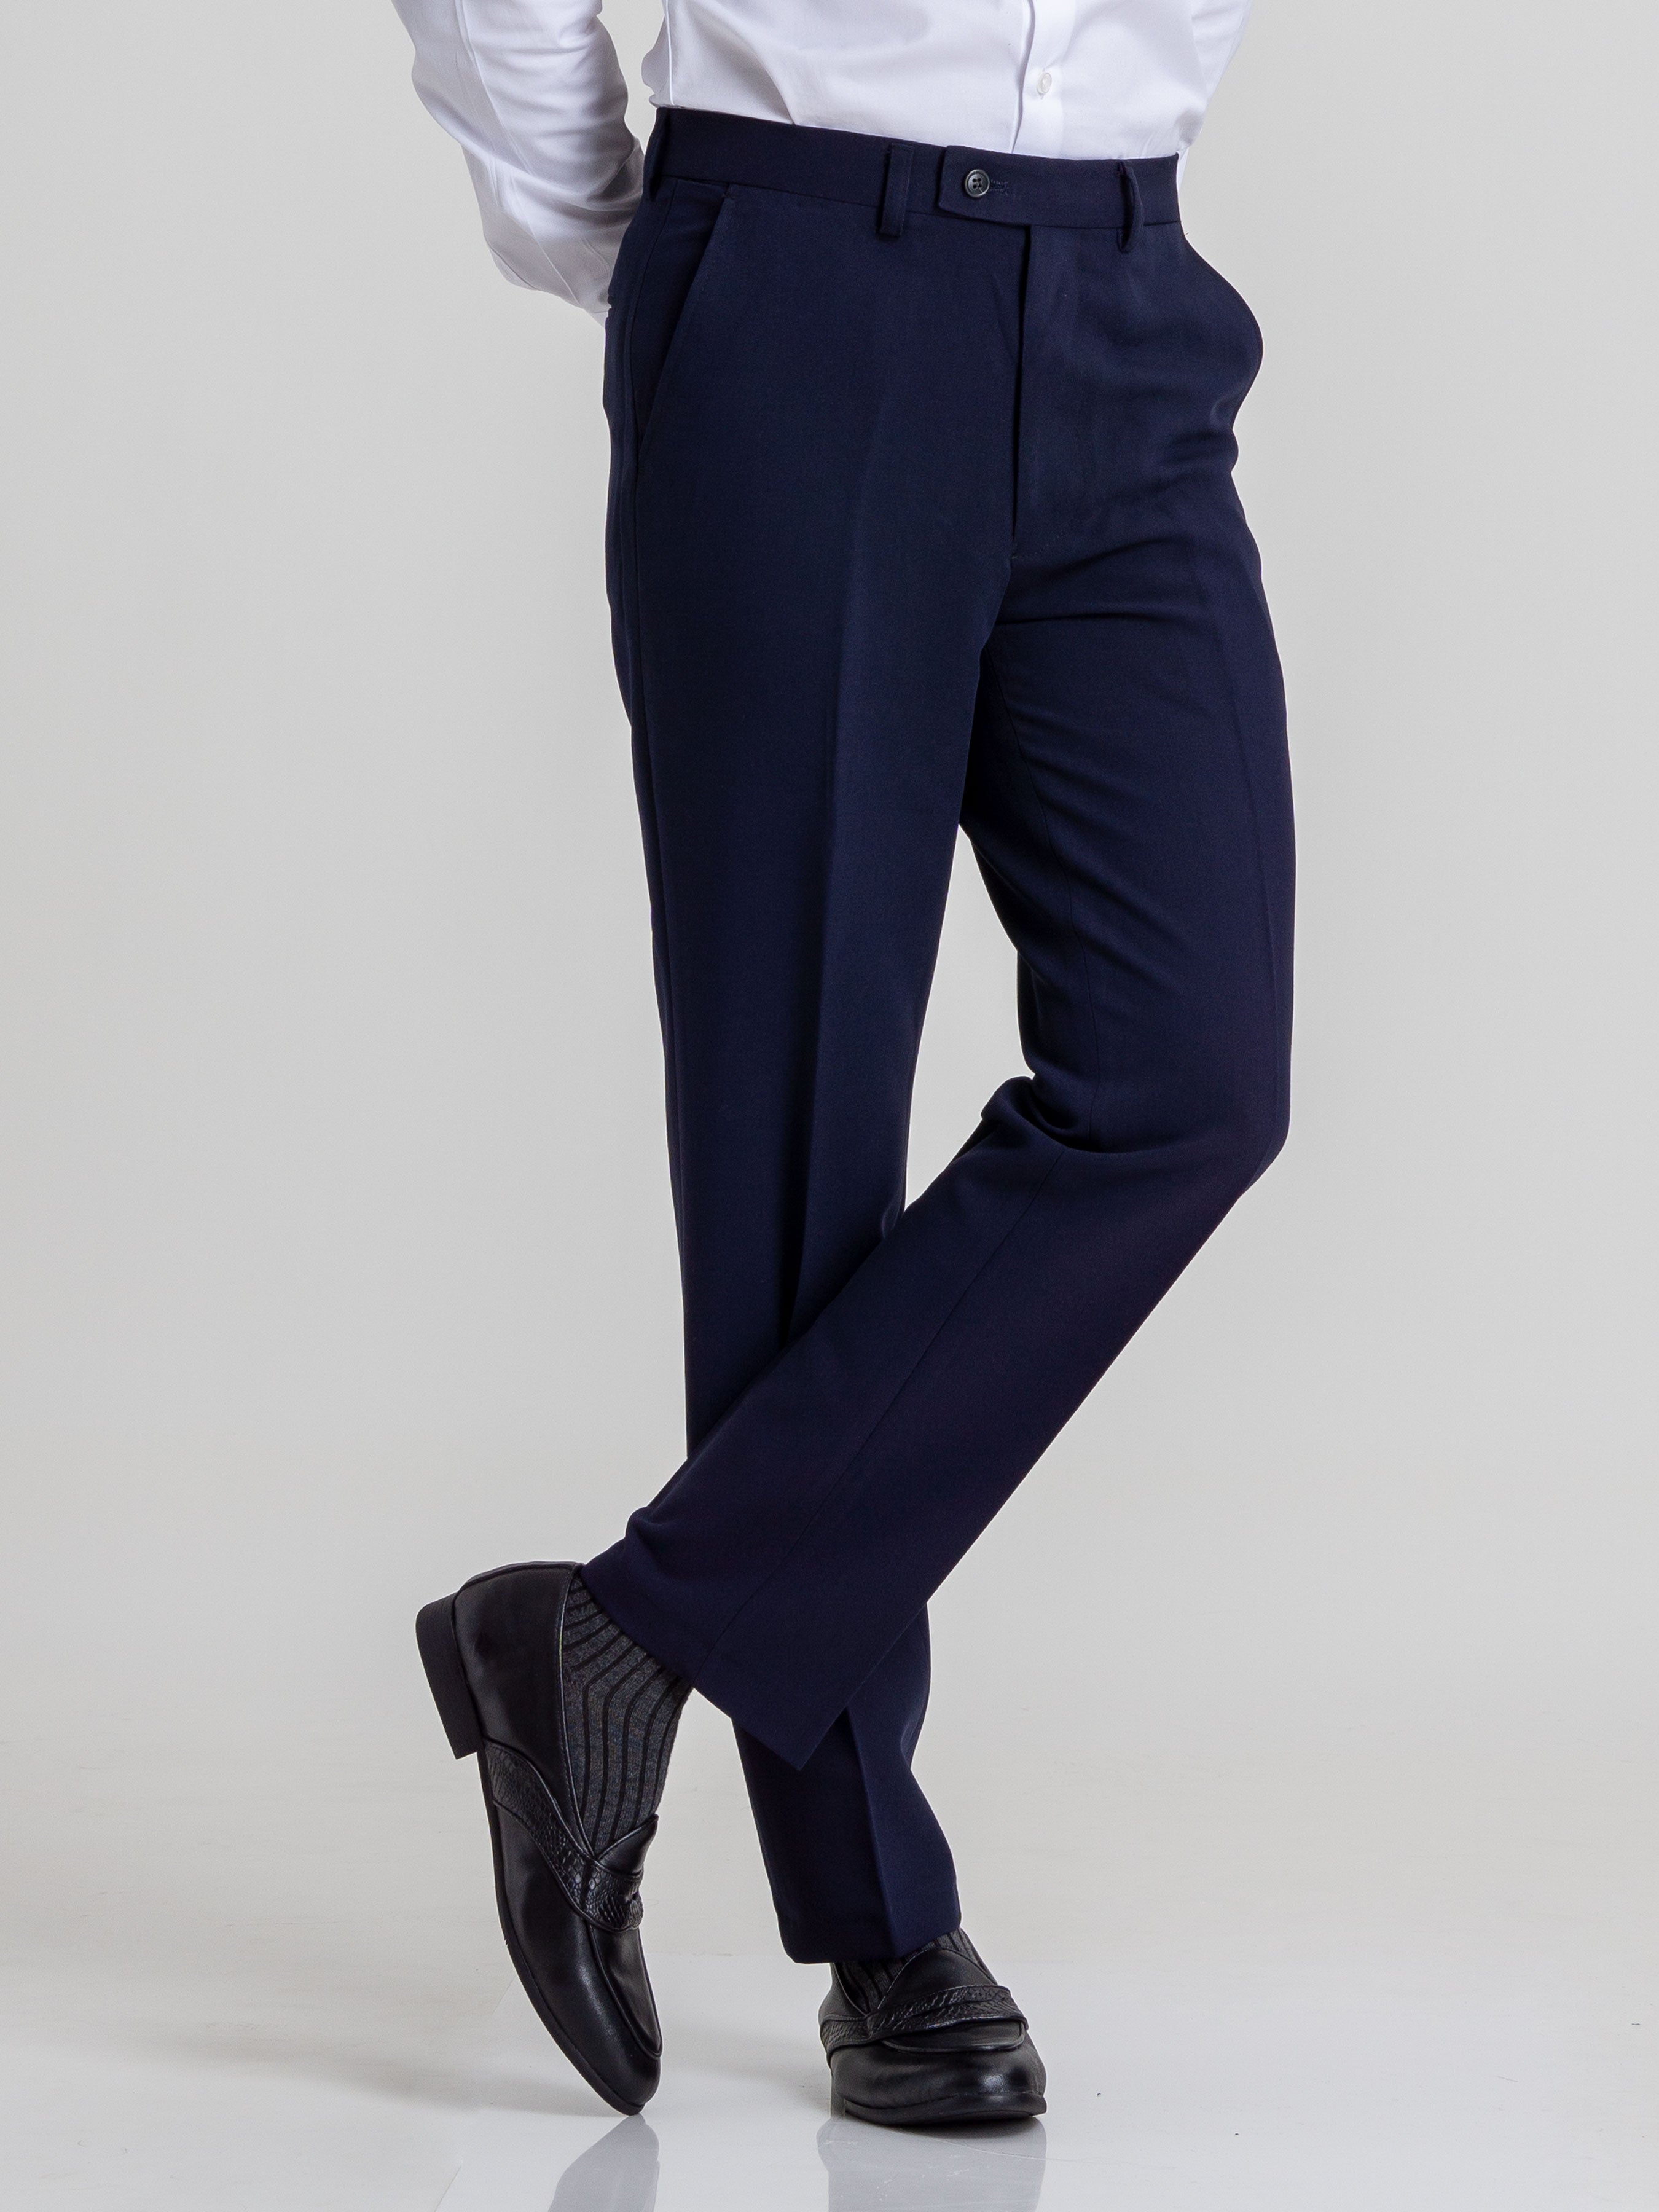 Trousers With Belt Loop -  Navy Blue Plain (Stretchable) - Zeve Shoes